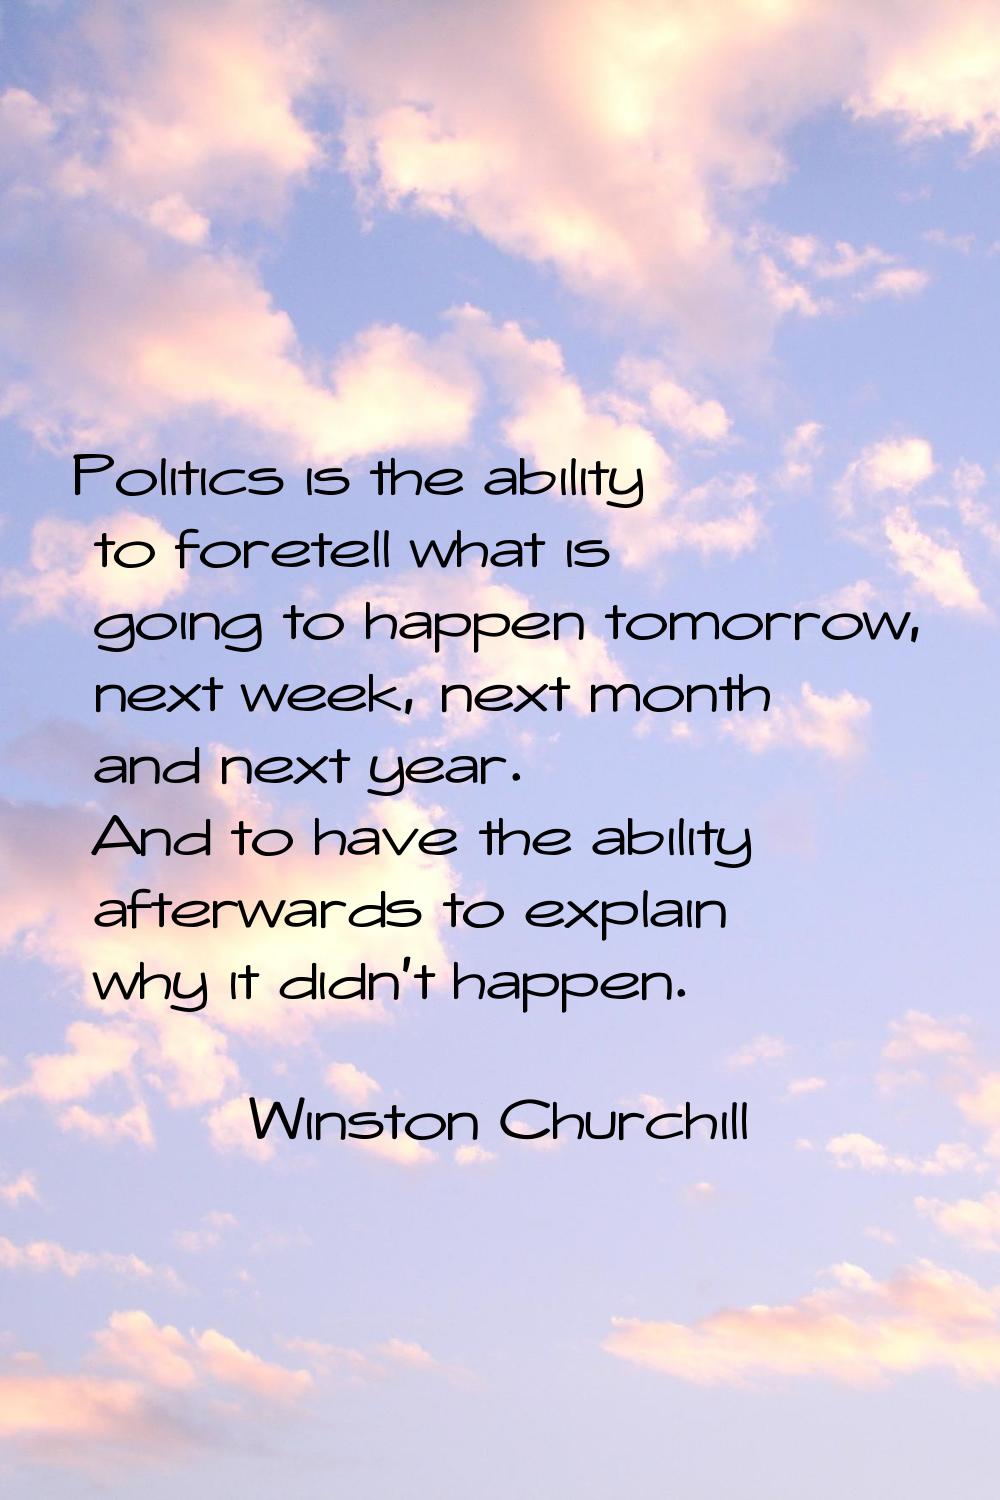 Politics is the ability to foretell what is going to happen tomorrow, next week, next month and nex